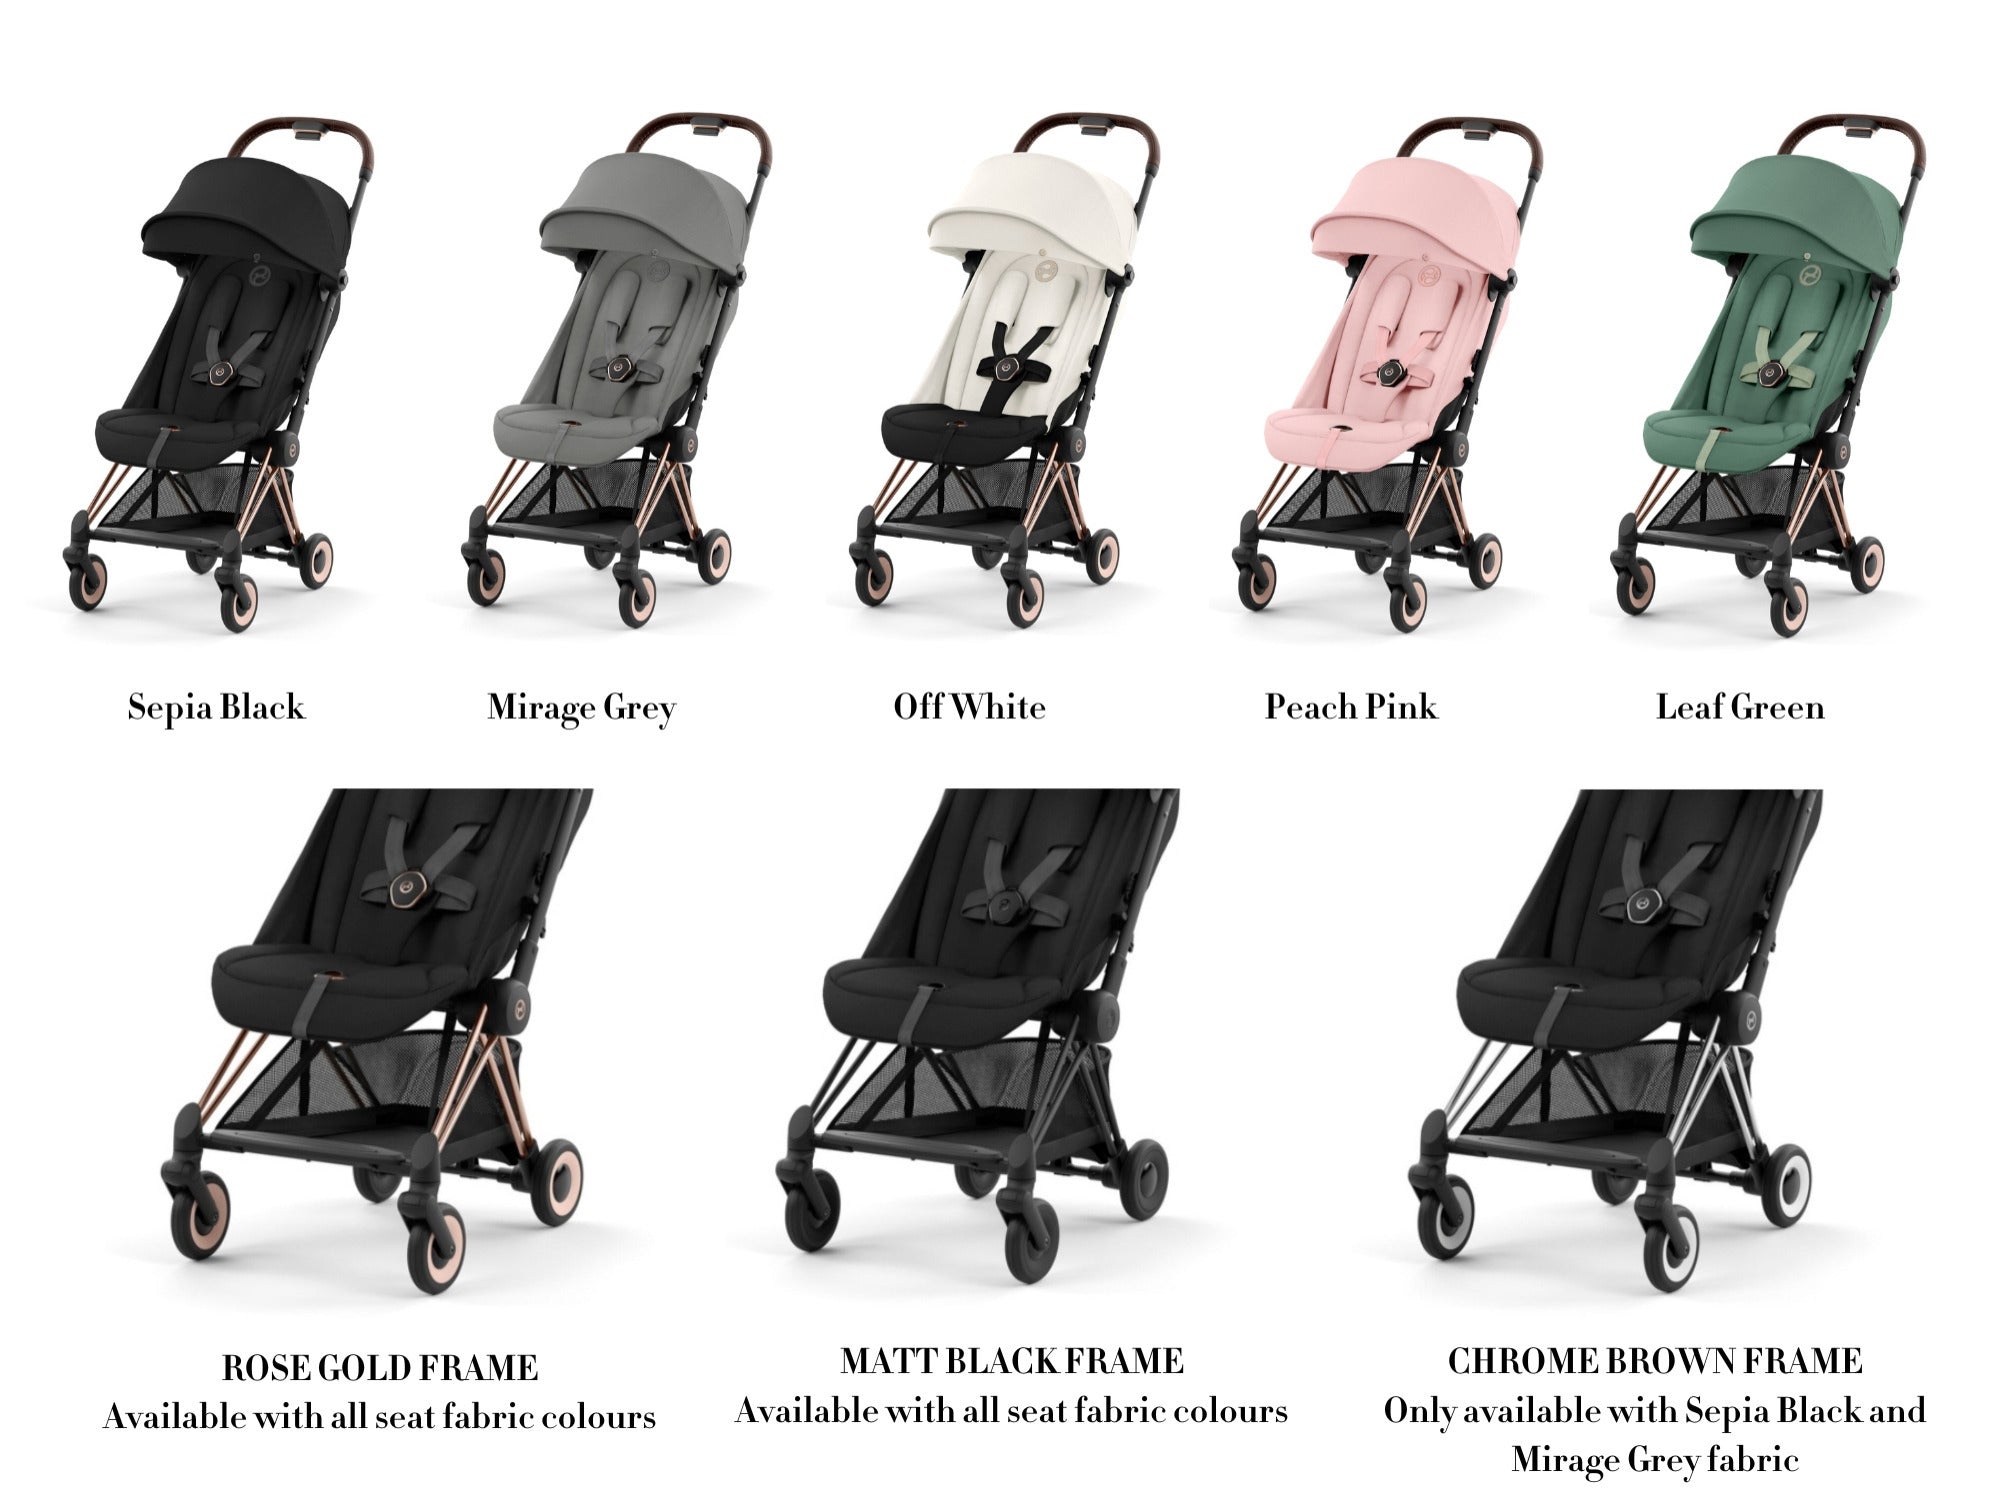 Introducing the Cybex Platinum 2024 Collection!